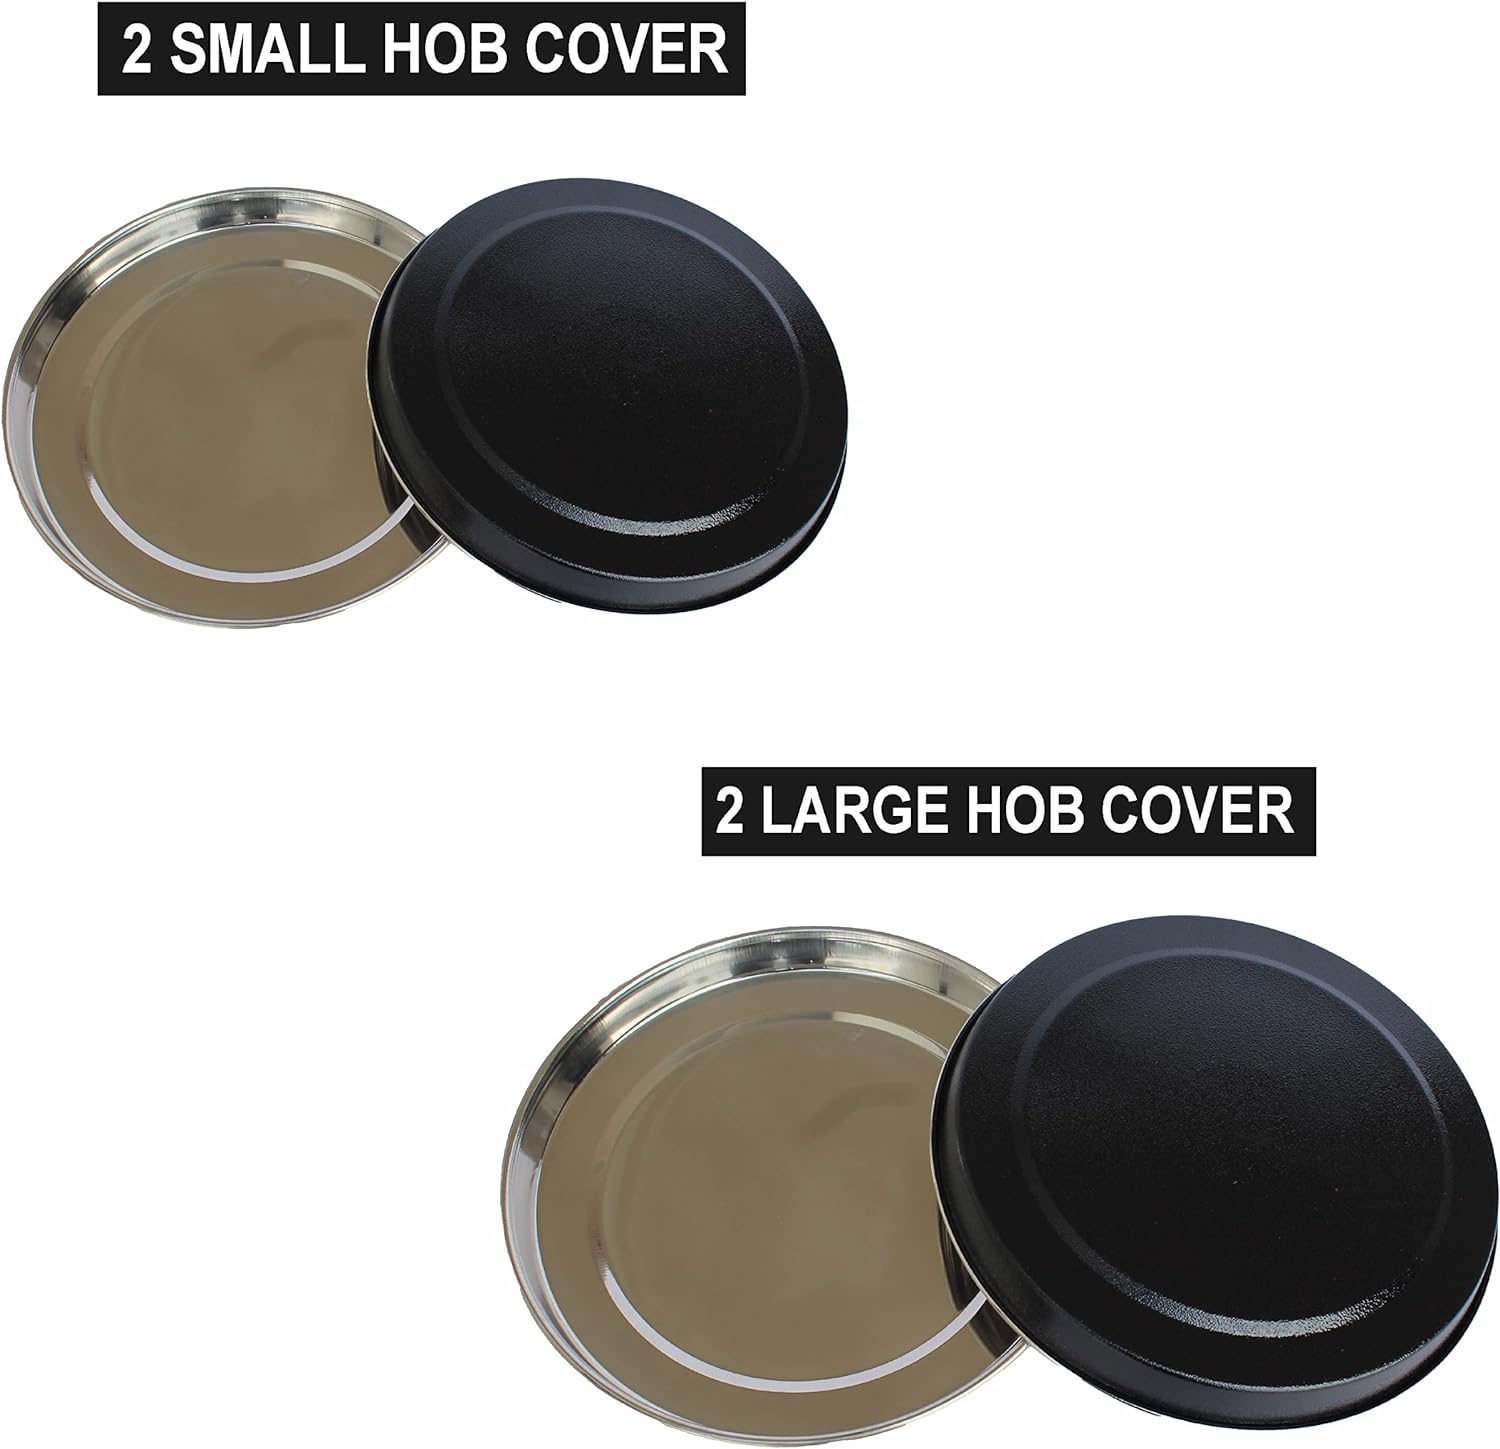 SUL 4 Pcs Hob Cover Set Stove Plate Cooker Top Burner Protector Silver Kit Home Kitchen Tools & Accessories Restaurants CANTEENS Safety Worktop Savers (Black) - Amazing Gadgets Outlet